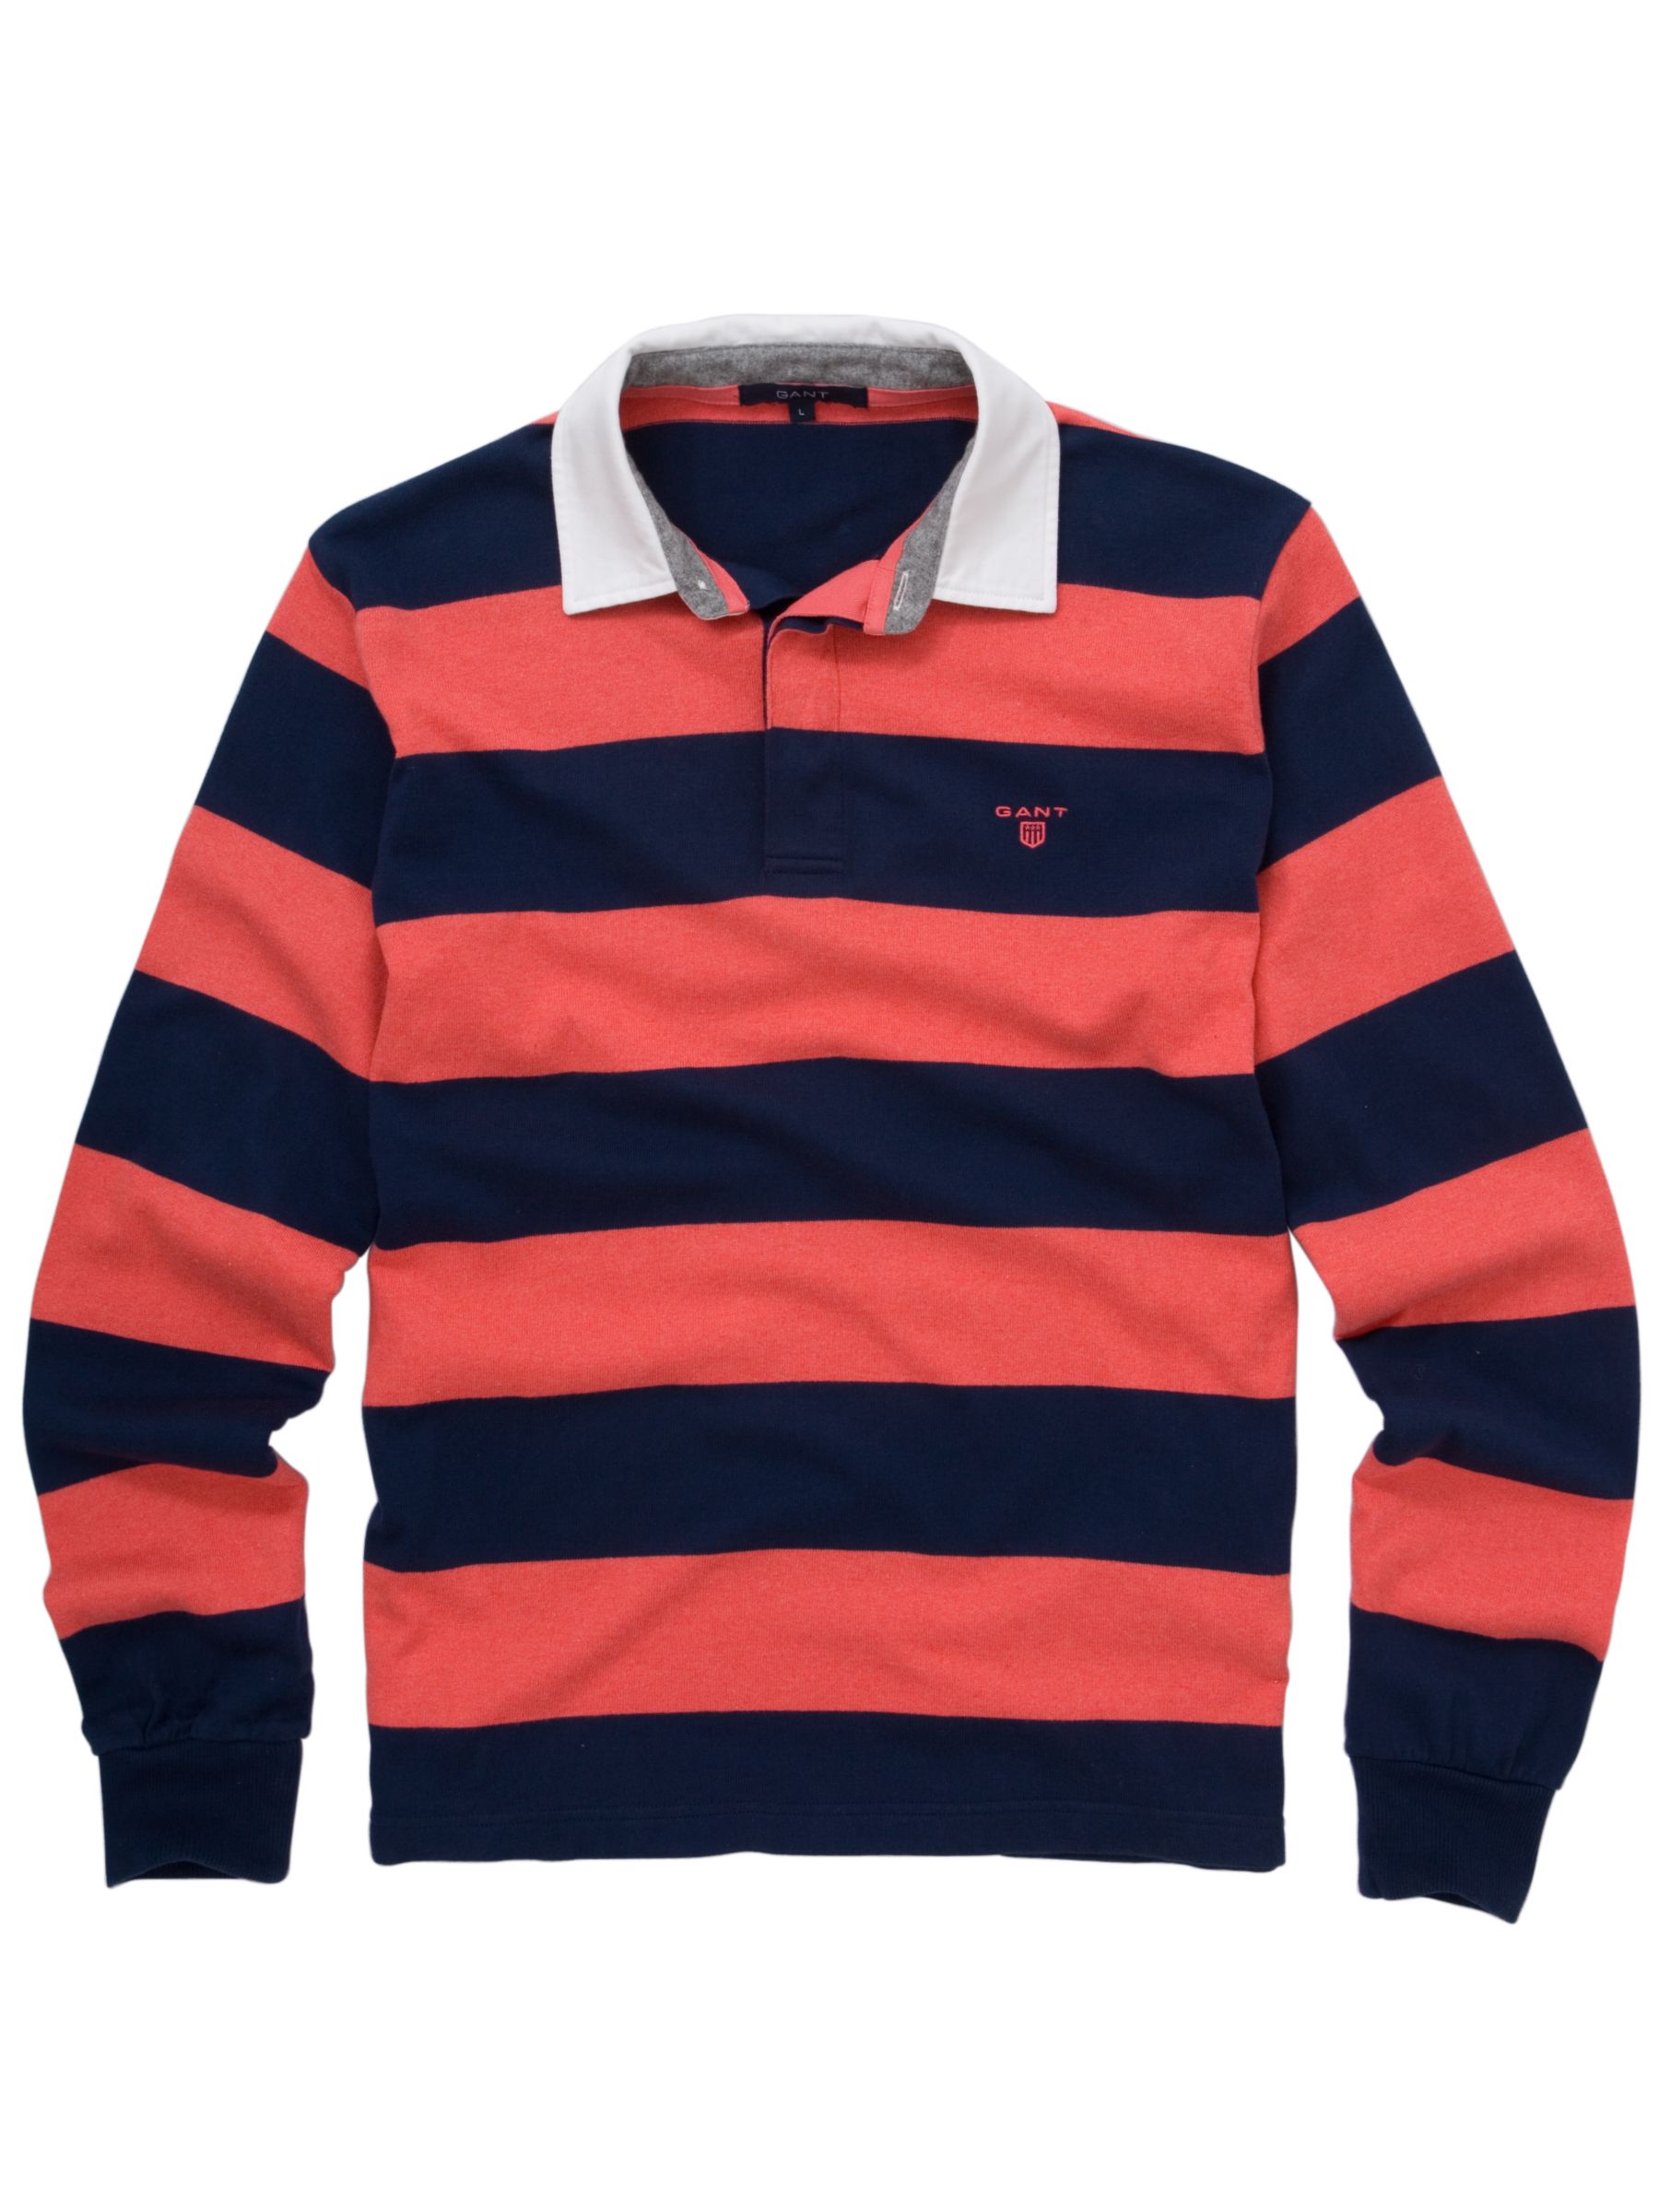 Gant Classic Barstripe Rugby Shirt, Coral/Navy